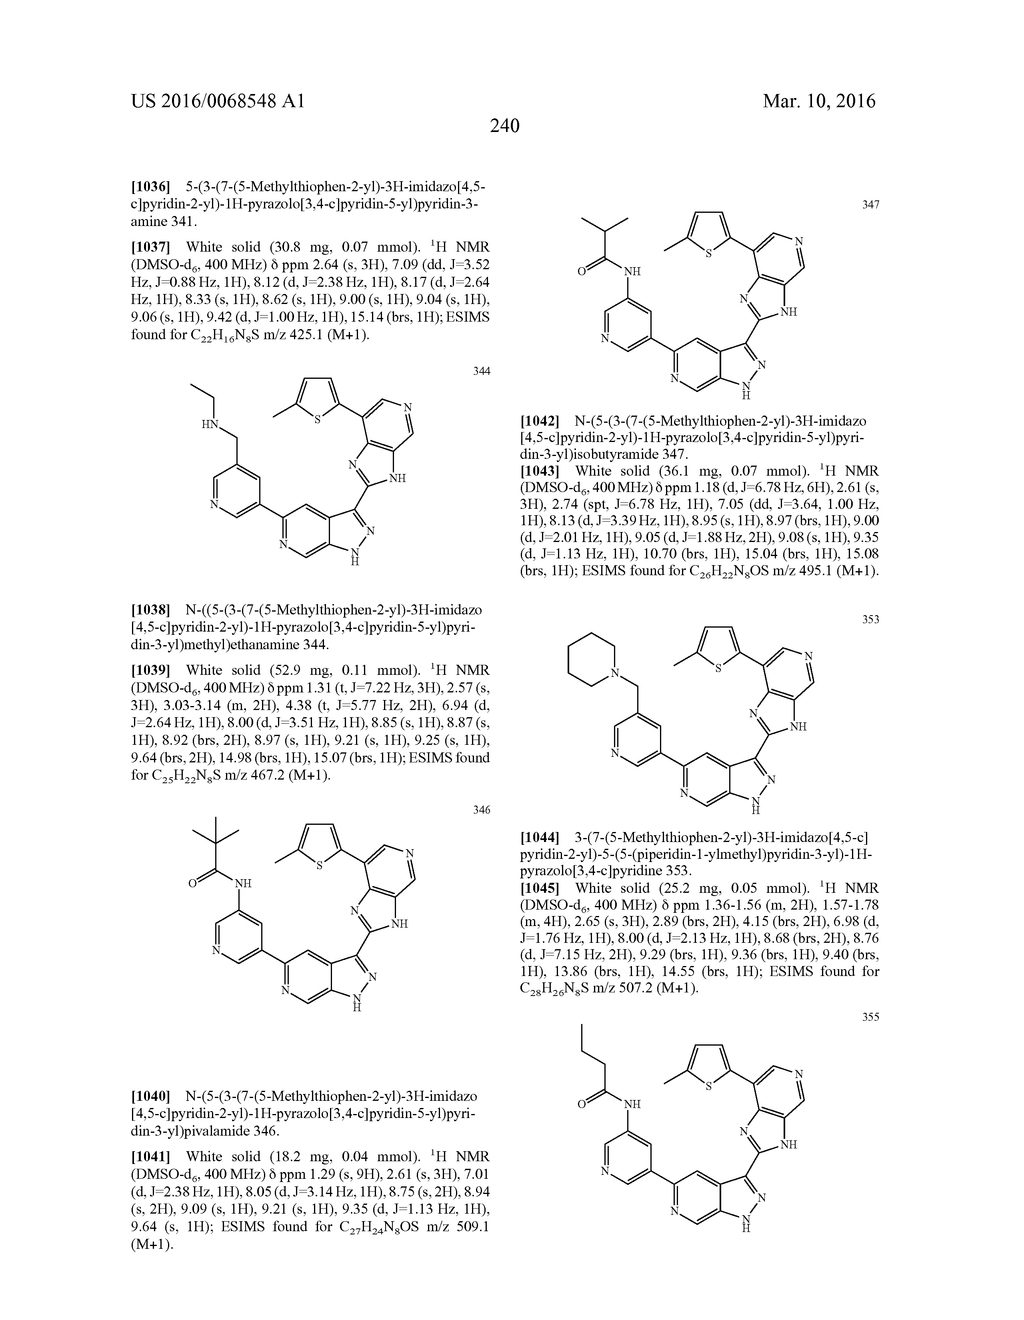 3-(3H-IMIDAZO[4,5-C]PYRIDIN-2-YL)-1H-PYRAZOLO[3,4-C]PYRIDINE AND     THERAPEUTIC USES THEREOF - diagram, schematic, and image 241